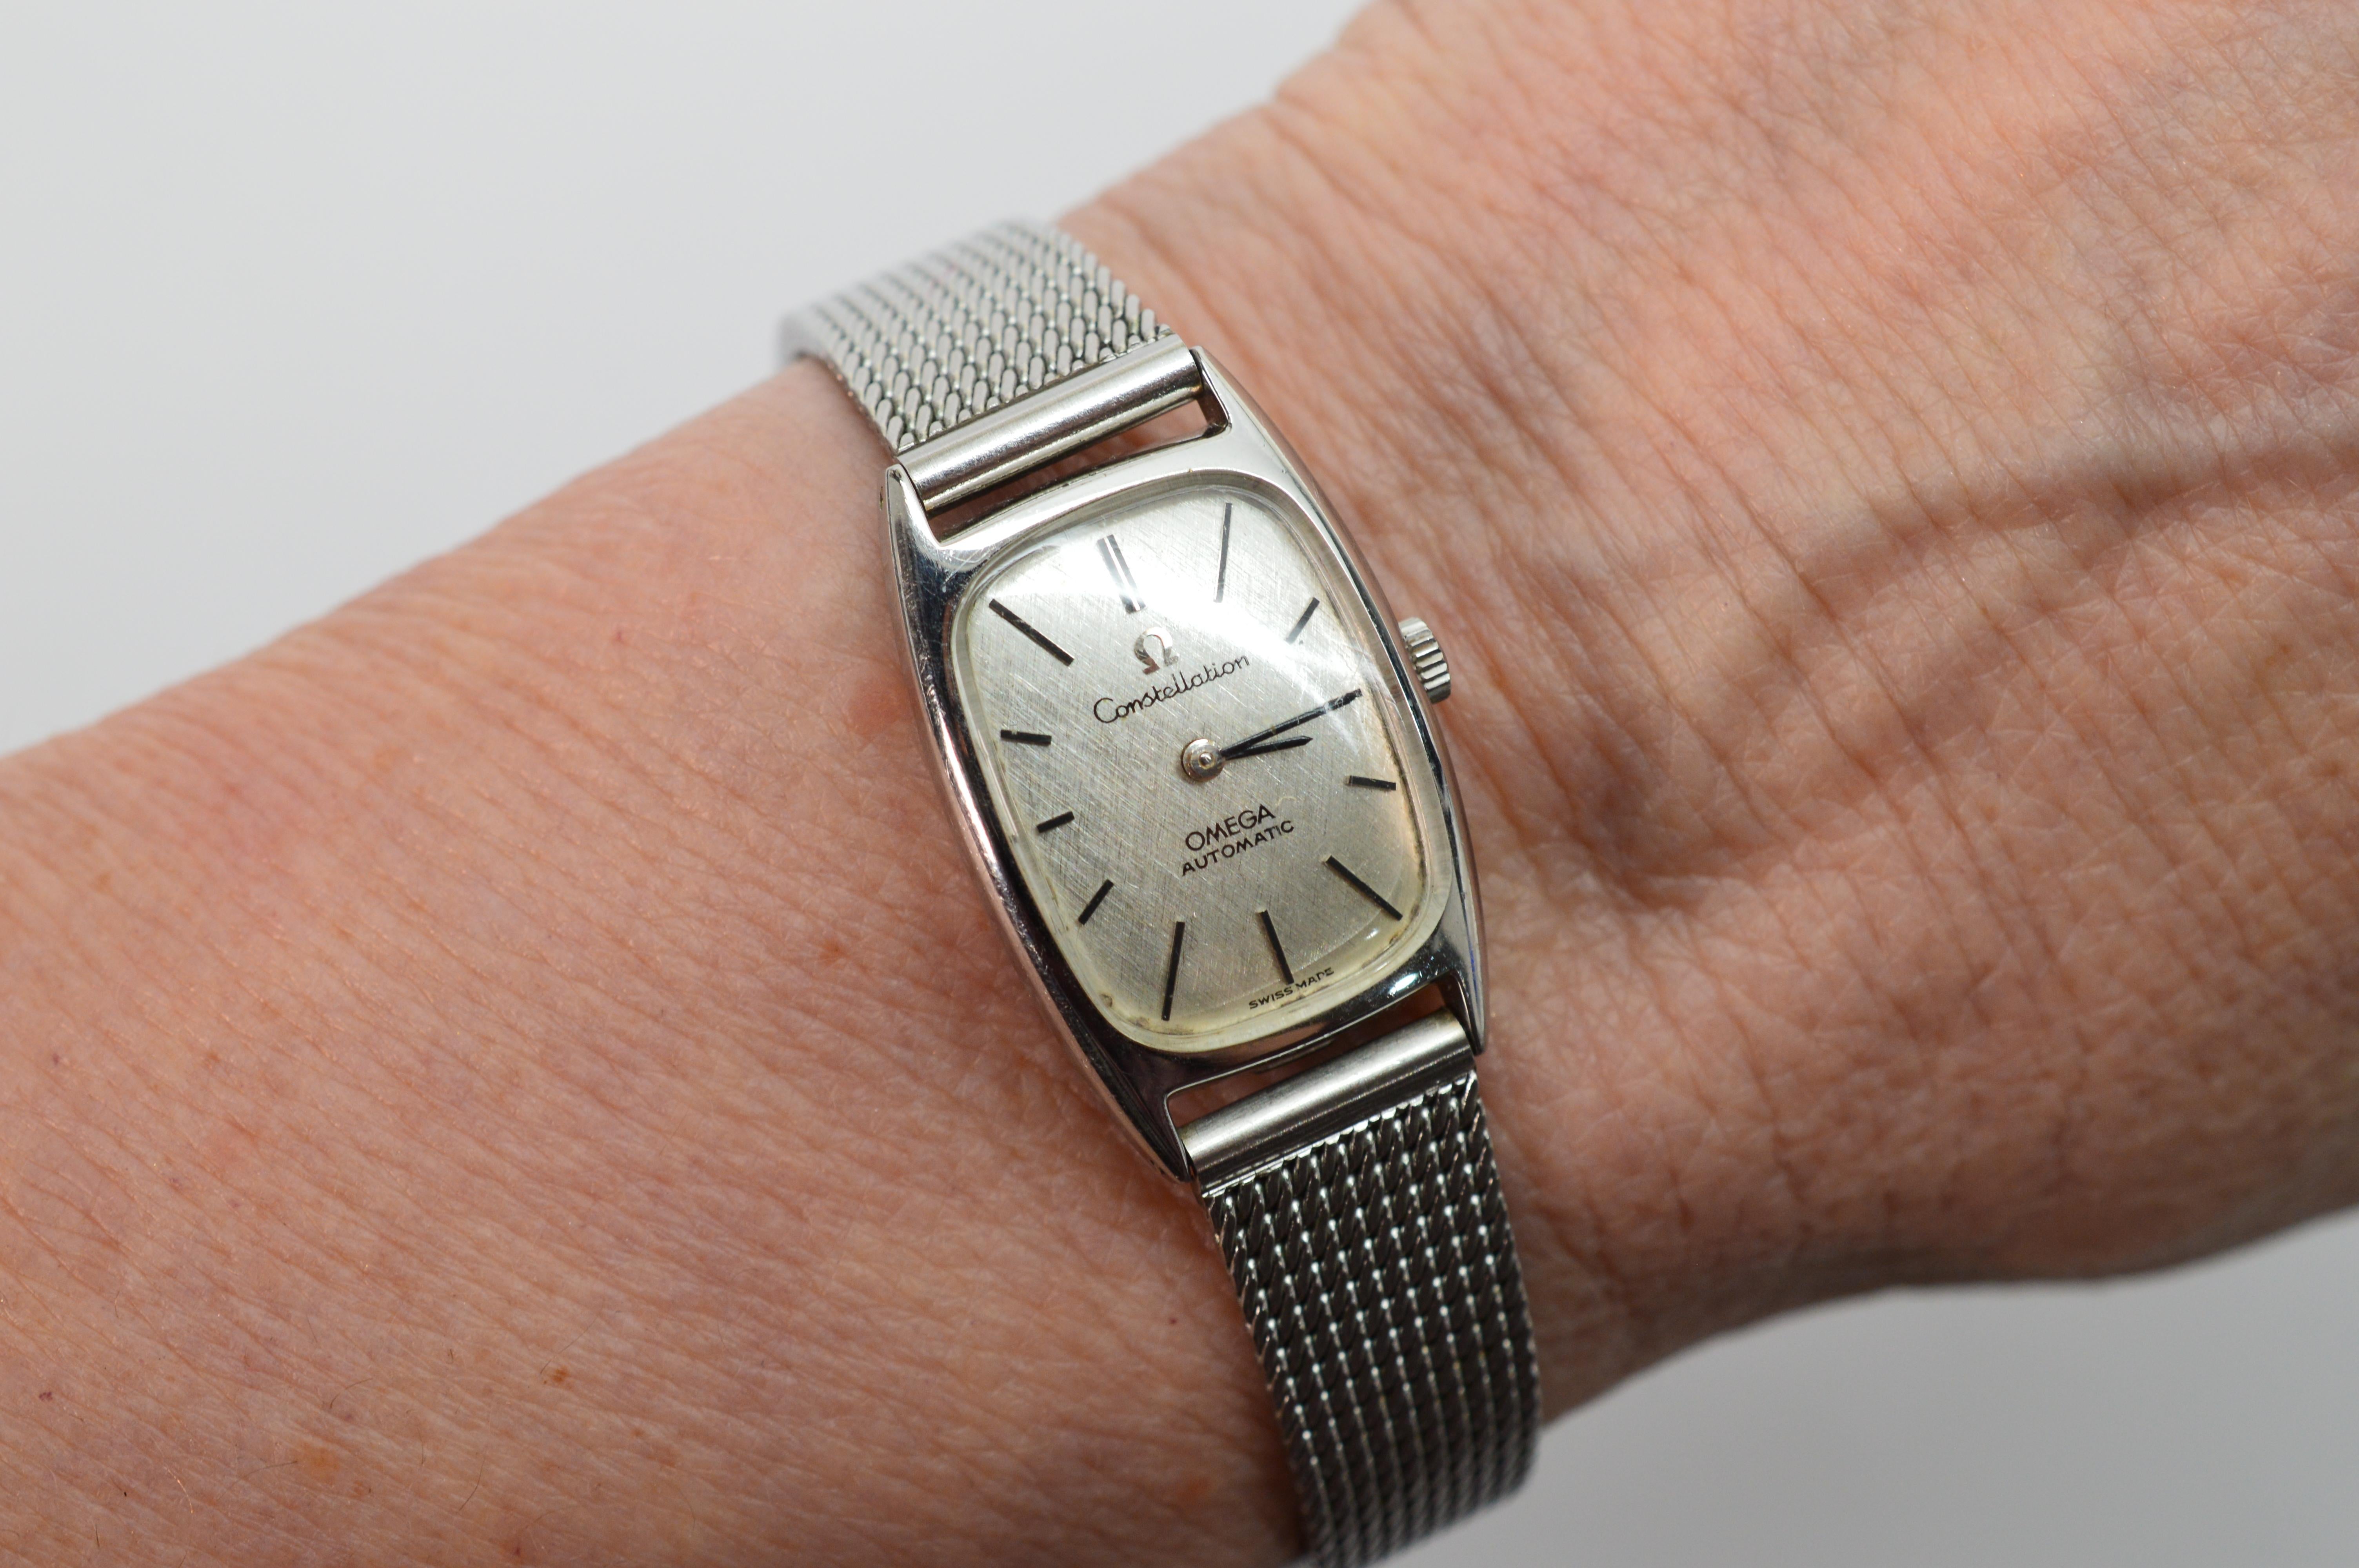 A vintage favorite, transcending casual to dress. Circa 1973, this hard to find Omega Ladies Constellation Wrist Watch has timeless style and functionality. Watch model number 551.09, with an ultra thin stainless steel case. Style number 551.09 and